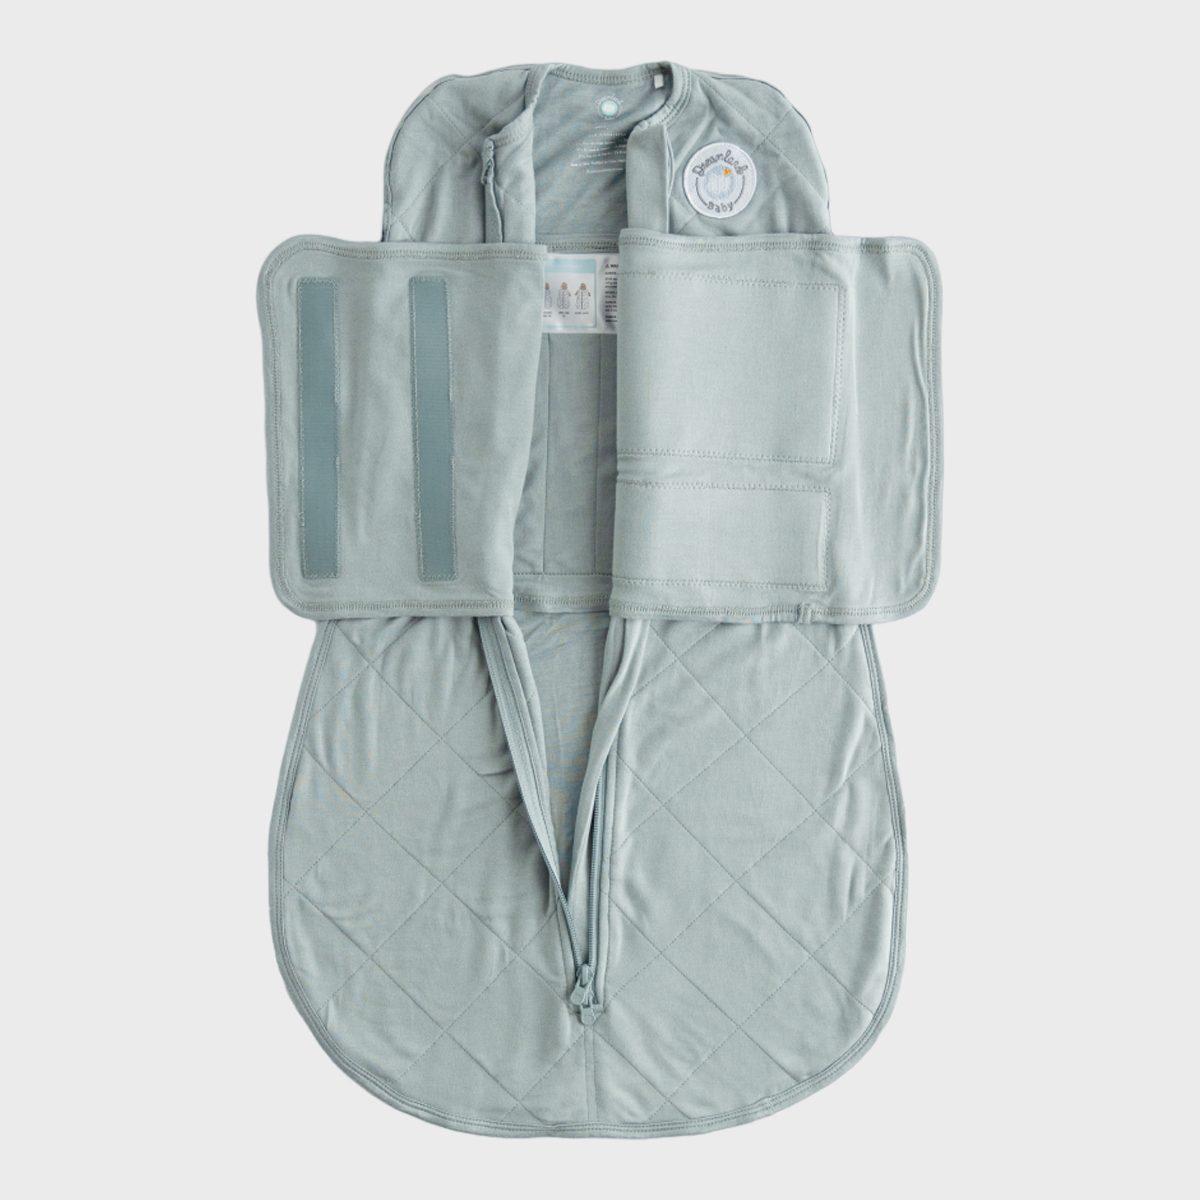 <p>Babies love being swaddled, but not every parent masters the art of wrapping a baby like those seasoned nurses on the maternity floor. So when you're on your own at home, this <a href="https://dreamlandbabyco.com/products/bamboo-classic-swaddle-0-6-months-non-weighted" rel="noopener noreferrer">popular swaddle</a> is the next best thing as one of the best baby gifts to give. Made from viscose from bamboo, this non-weighted option has a convenient built-in swaddle band and a two-way zipper that makes diaper changes a breeze.</p> <p>And as a baby's sleep needs change, so does this swaddle. There are three ways to wear it: both arms in, one arm in, and both arms out. This means it ultimately goes from swaddle to sleep sack so they'll feel like they're wrapped in a <a href="https://www.rd.com/list/best-throw-blankets/">cozy blanket</a> all night.</p> <p class="listicle-page__cta-button-shop"><a class="shop-btn" href="https://dreamlandbabyco.com/products/bamboo-classic-swaddle-0-6-months-non-weighted">Shop Now</a></p>